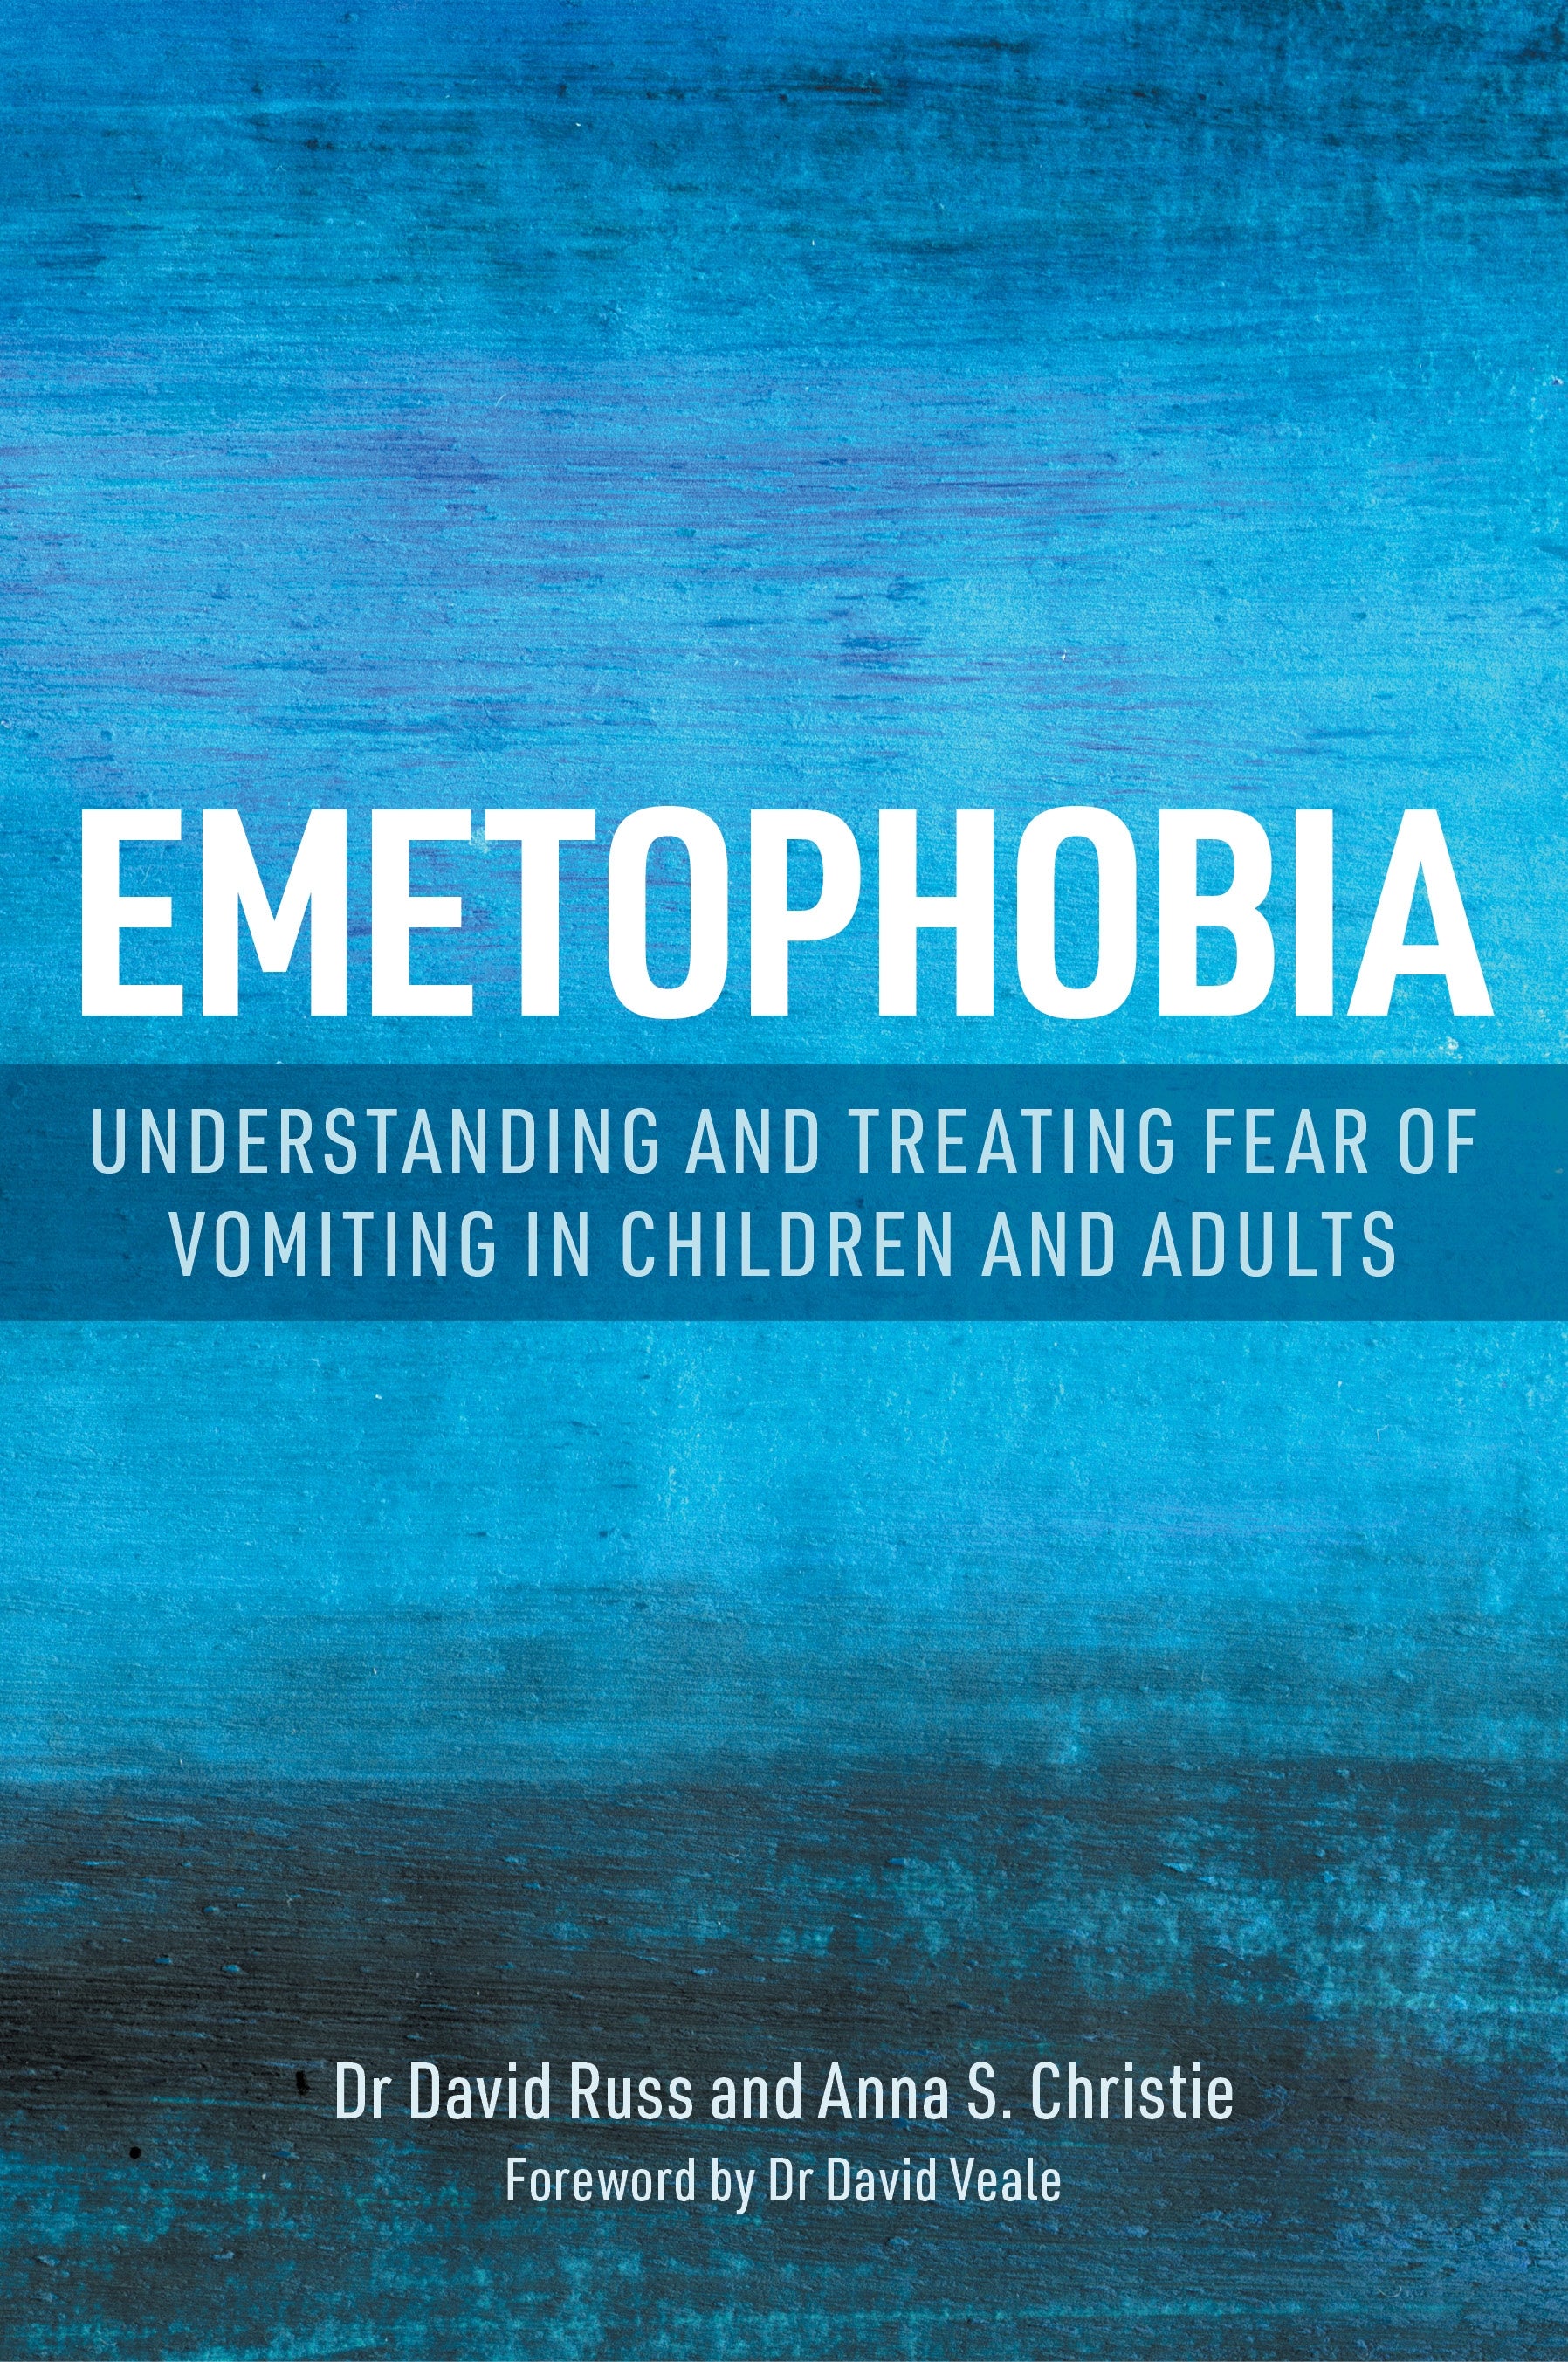 Emetophobia by David Veale, Anna S. Christie, Dr David Russ